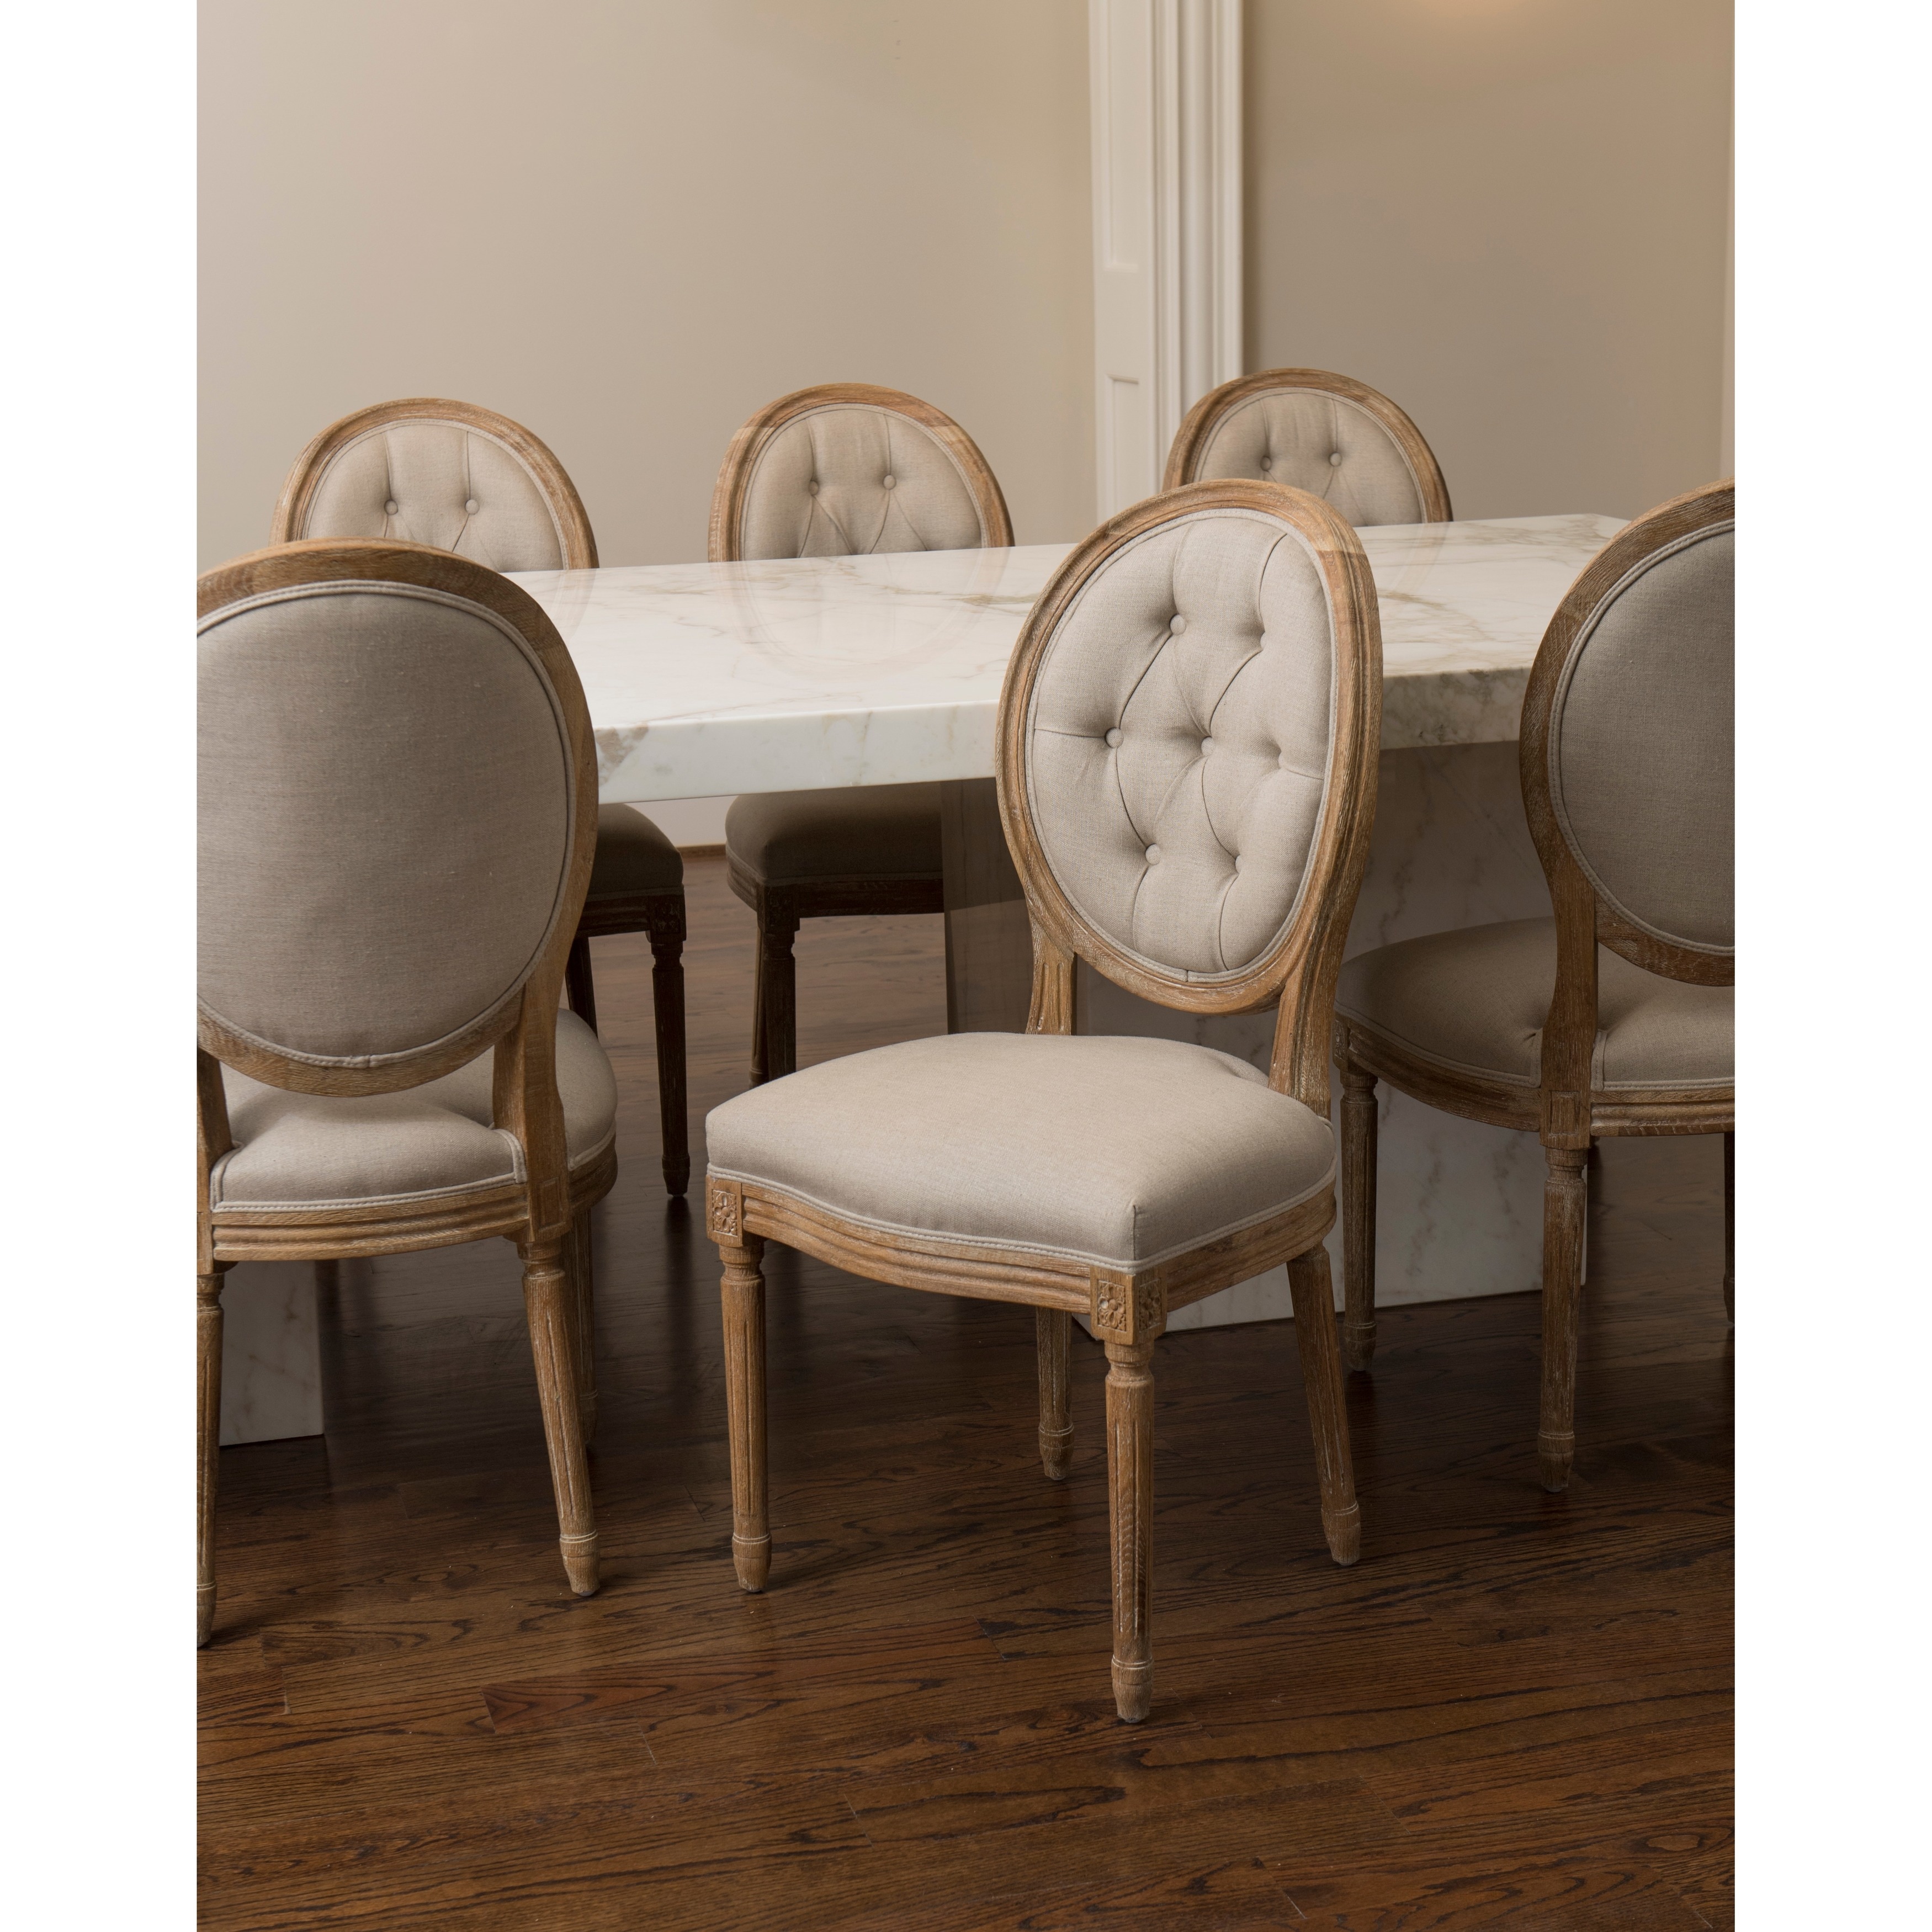 Shop King Louis Dining Chair Overstock 8657239